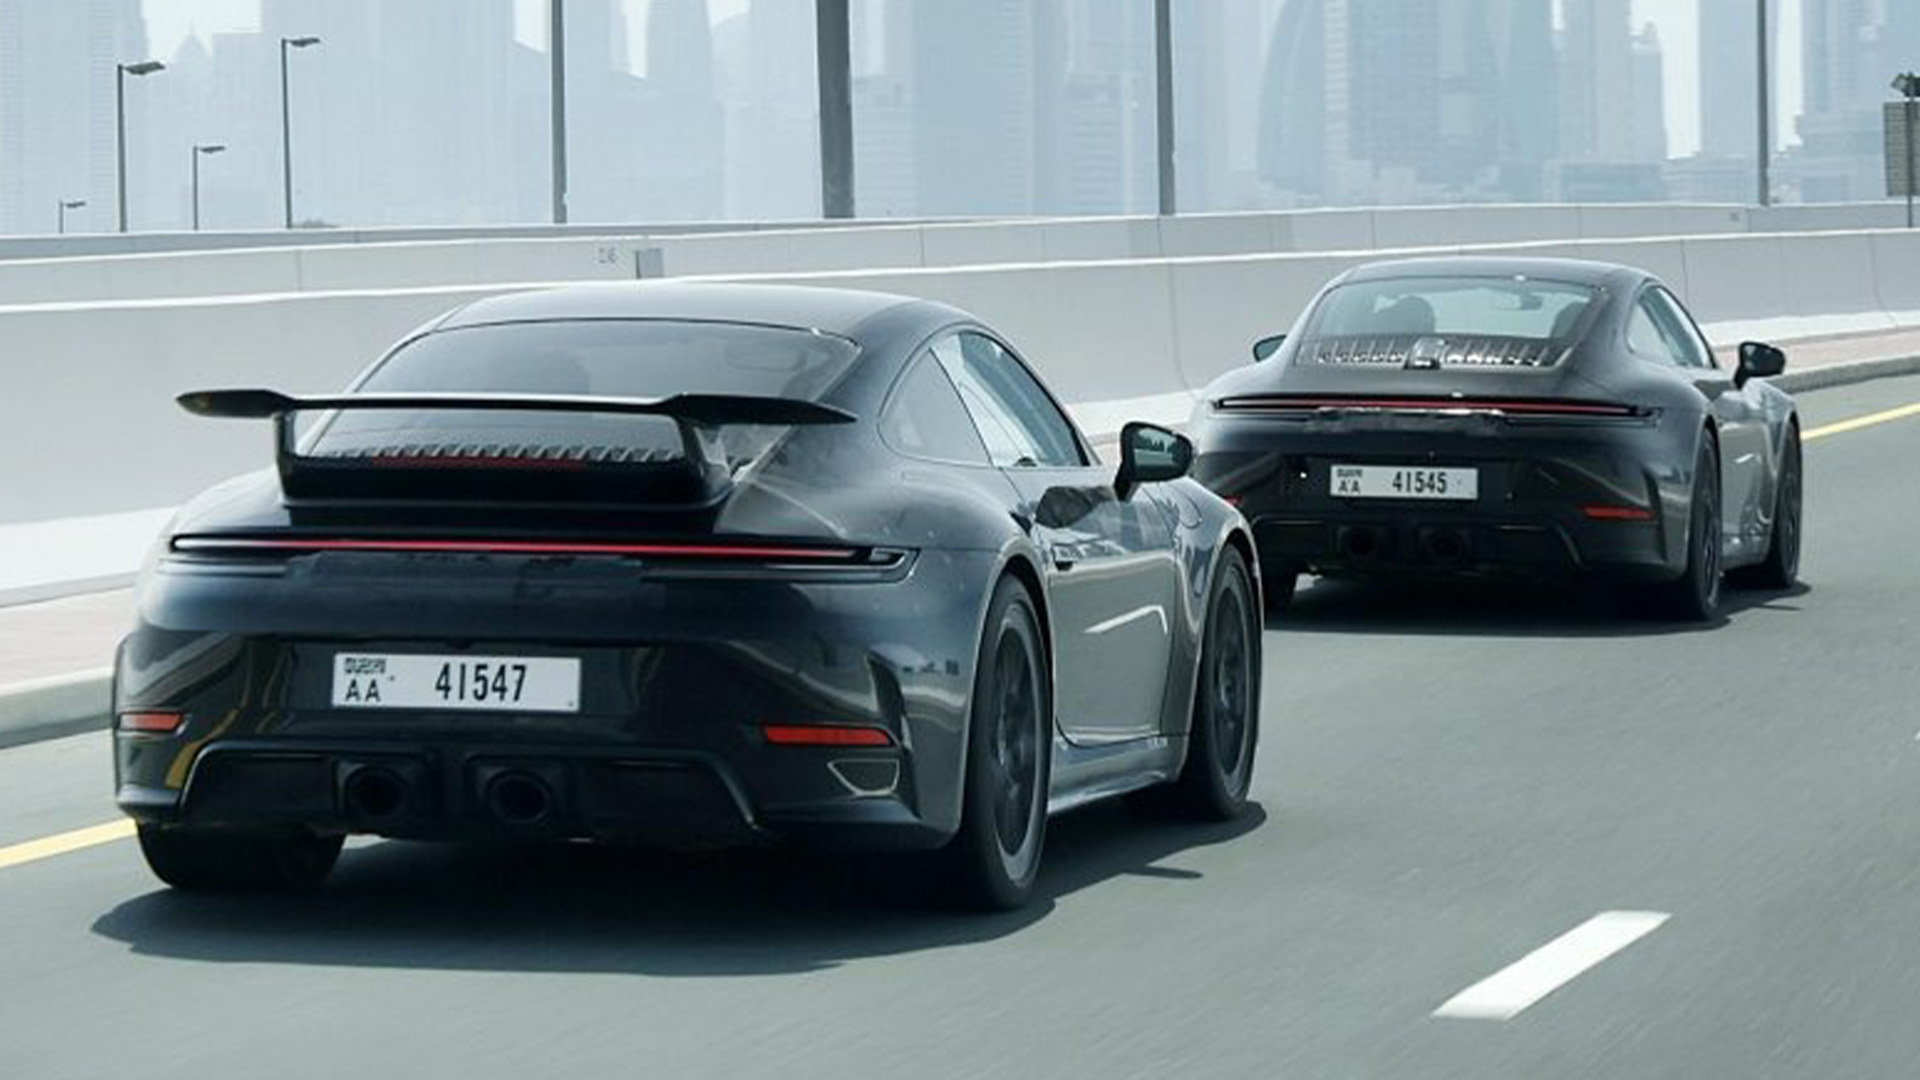 The Porsche 911 Hybrid will be revealed on May 28.